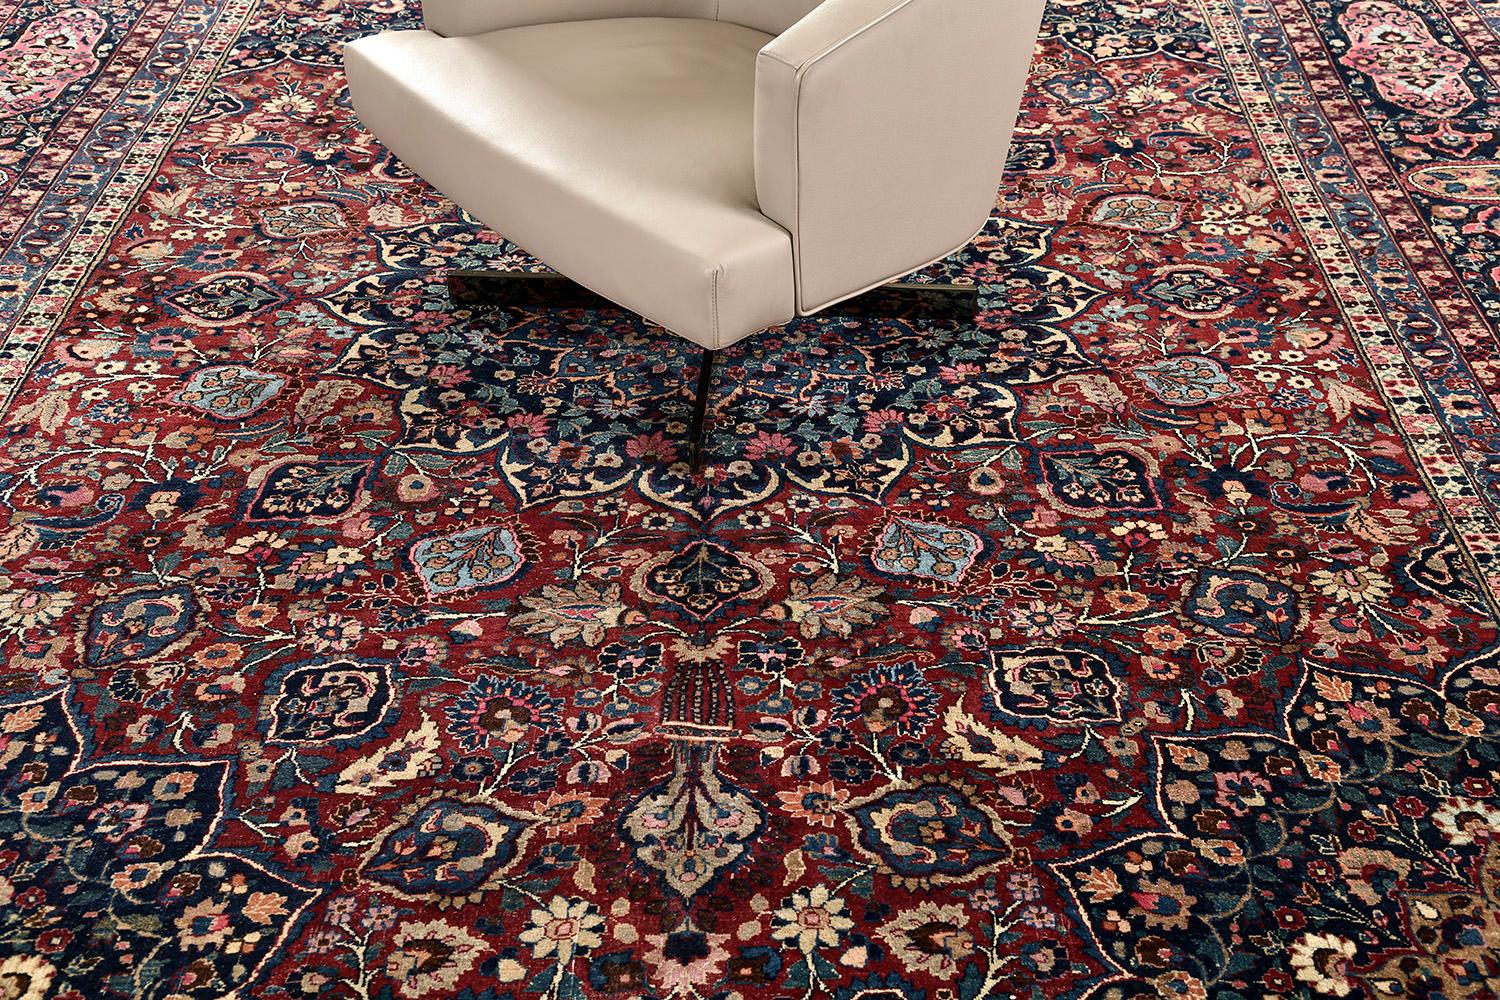 Rich in color, texture and beguiling ambiance, this Vintage Persian Mashad rug beautifully displays timeless elegance and regal charm. An impressice testament to traditional Persian weaving, it features an all-over floral pattern composed of